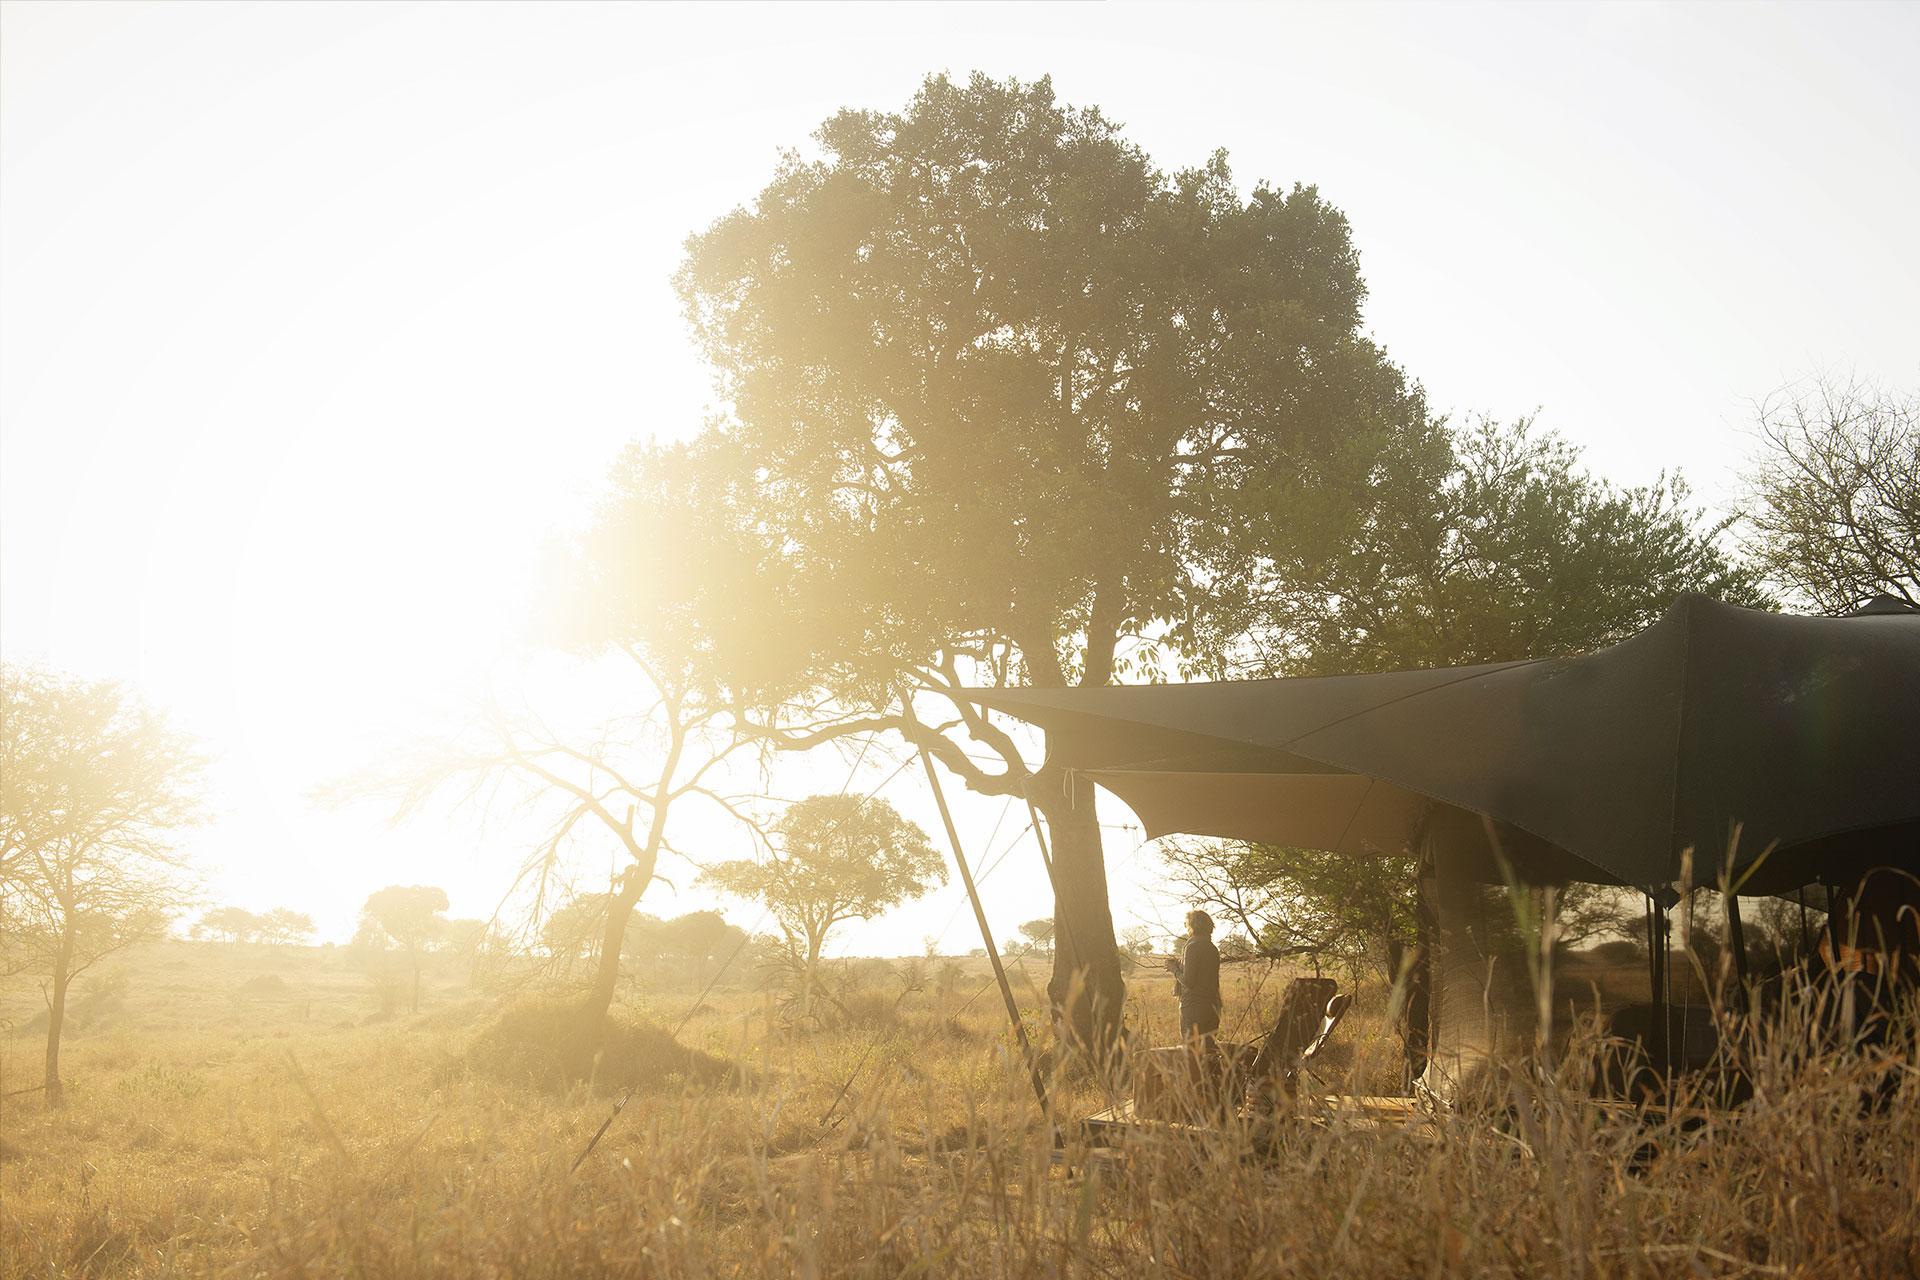 The Bedouin-style tents are positioned on a raised platforms to give you a 360-degree view of the Serengeti plains...